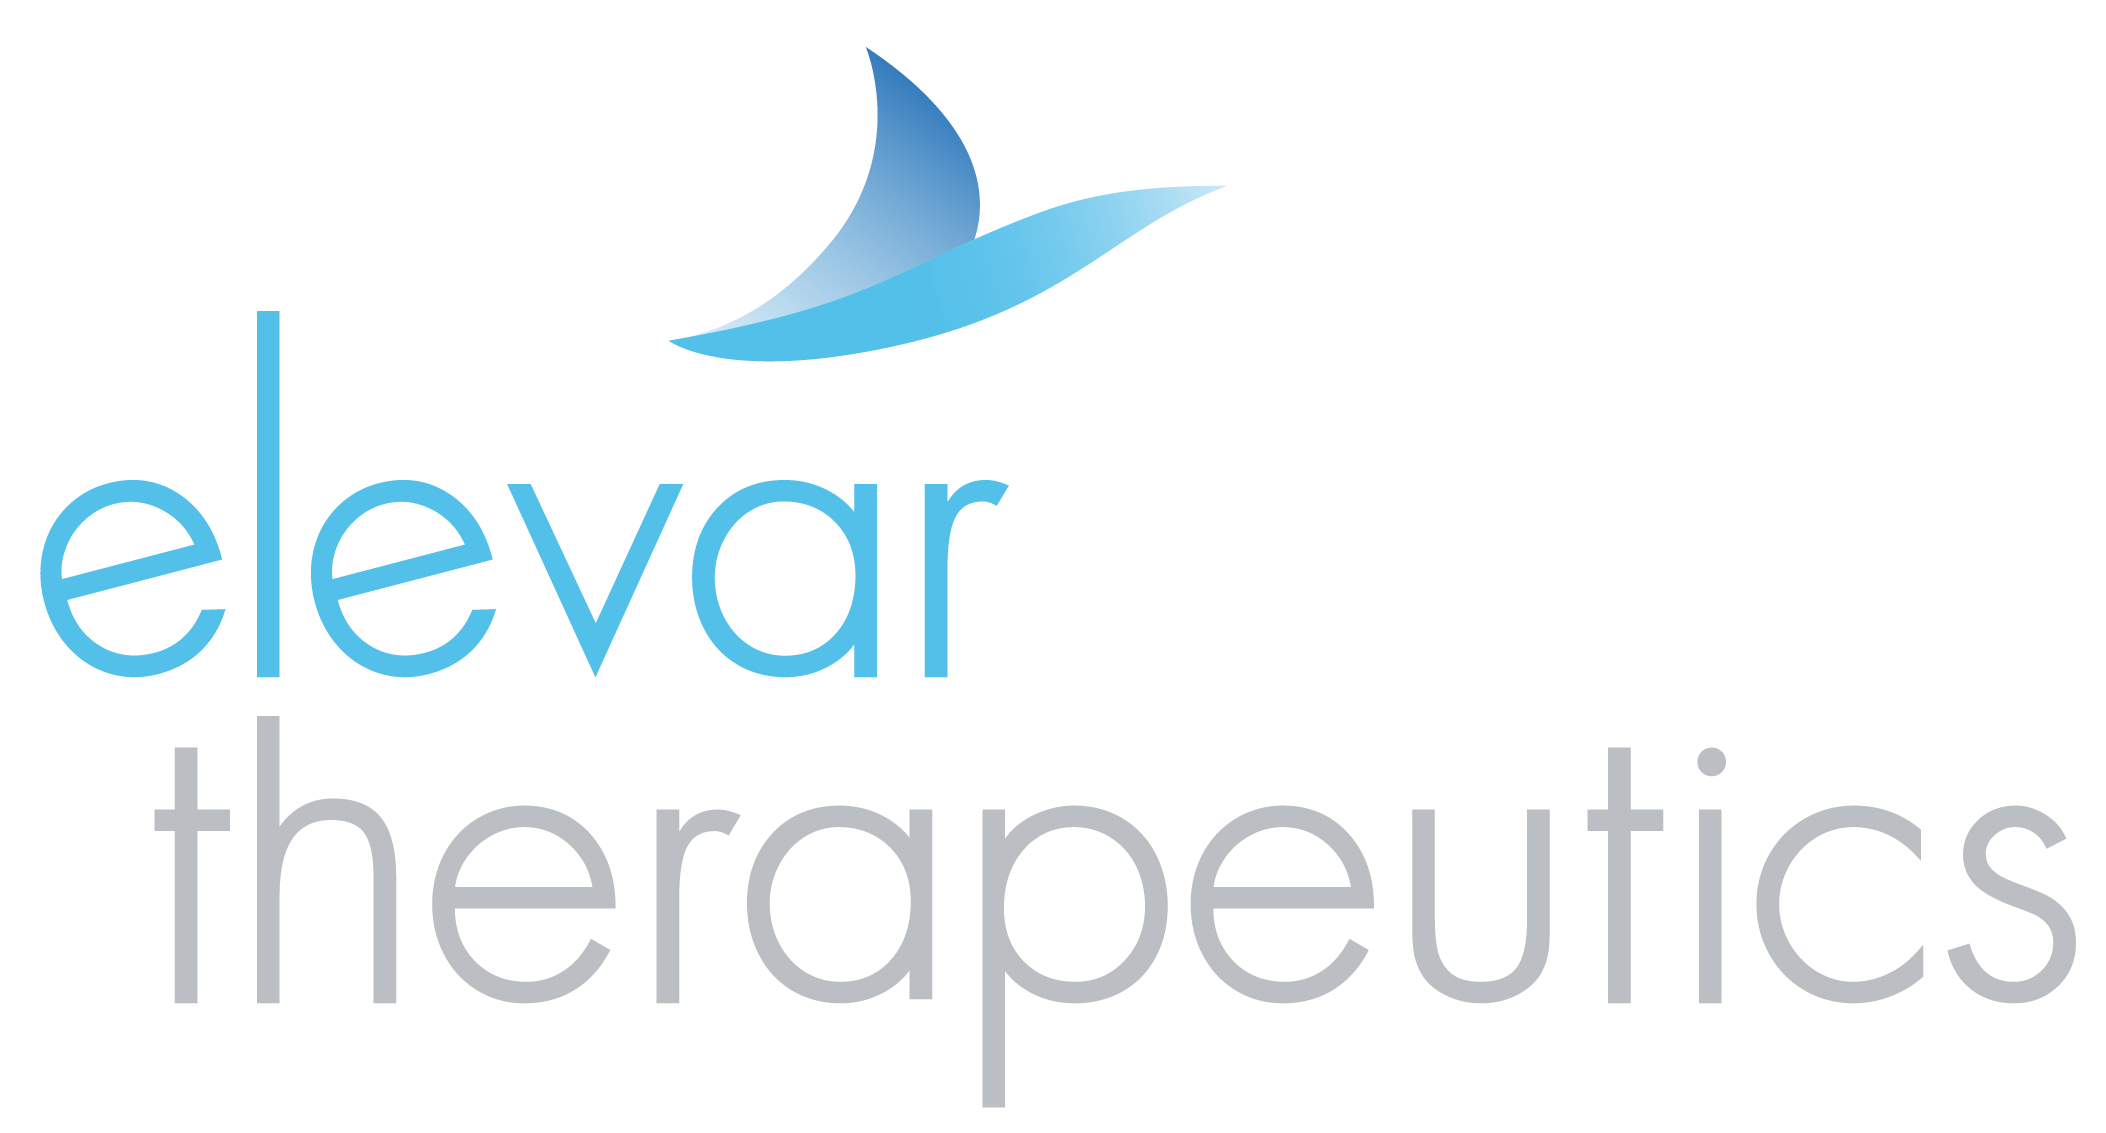 Elevar Therapeutics Announces Camrelizumab Plus Rivoceranib Significantly Prolonged Overall Survival and Progression-Free Survival Versus Sorafenib in Patients With Unresectable Hepatocellular Carcinoma During Phase 3 Trial, a Joint Program With Hengrui Pharma